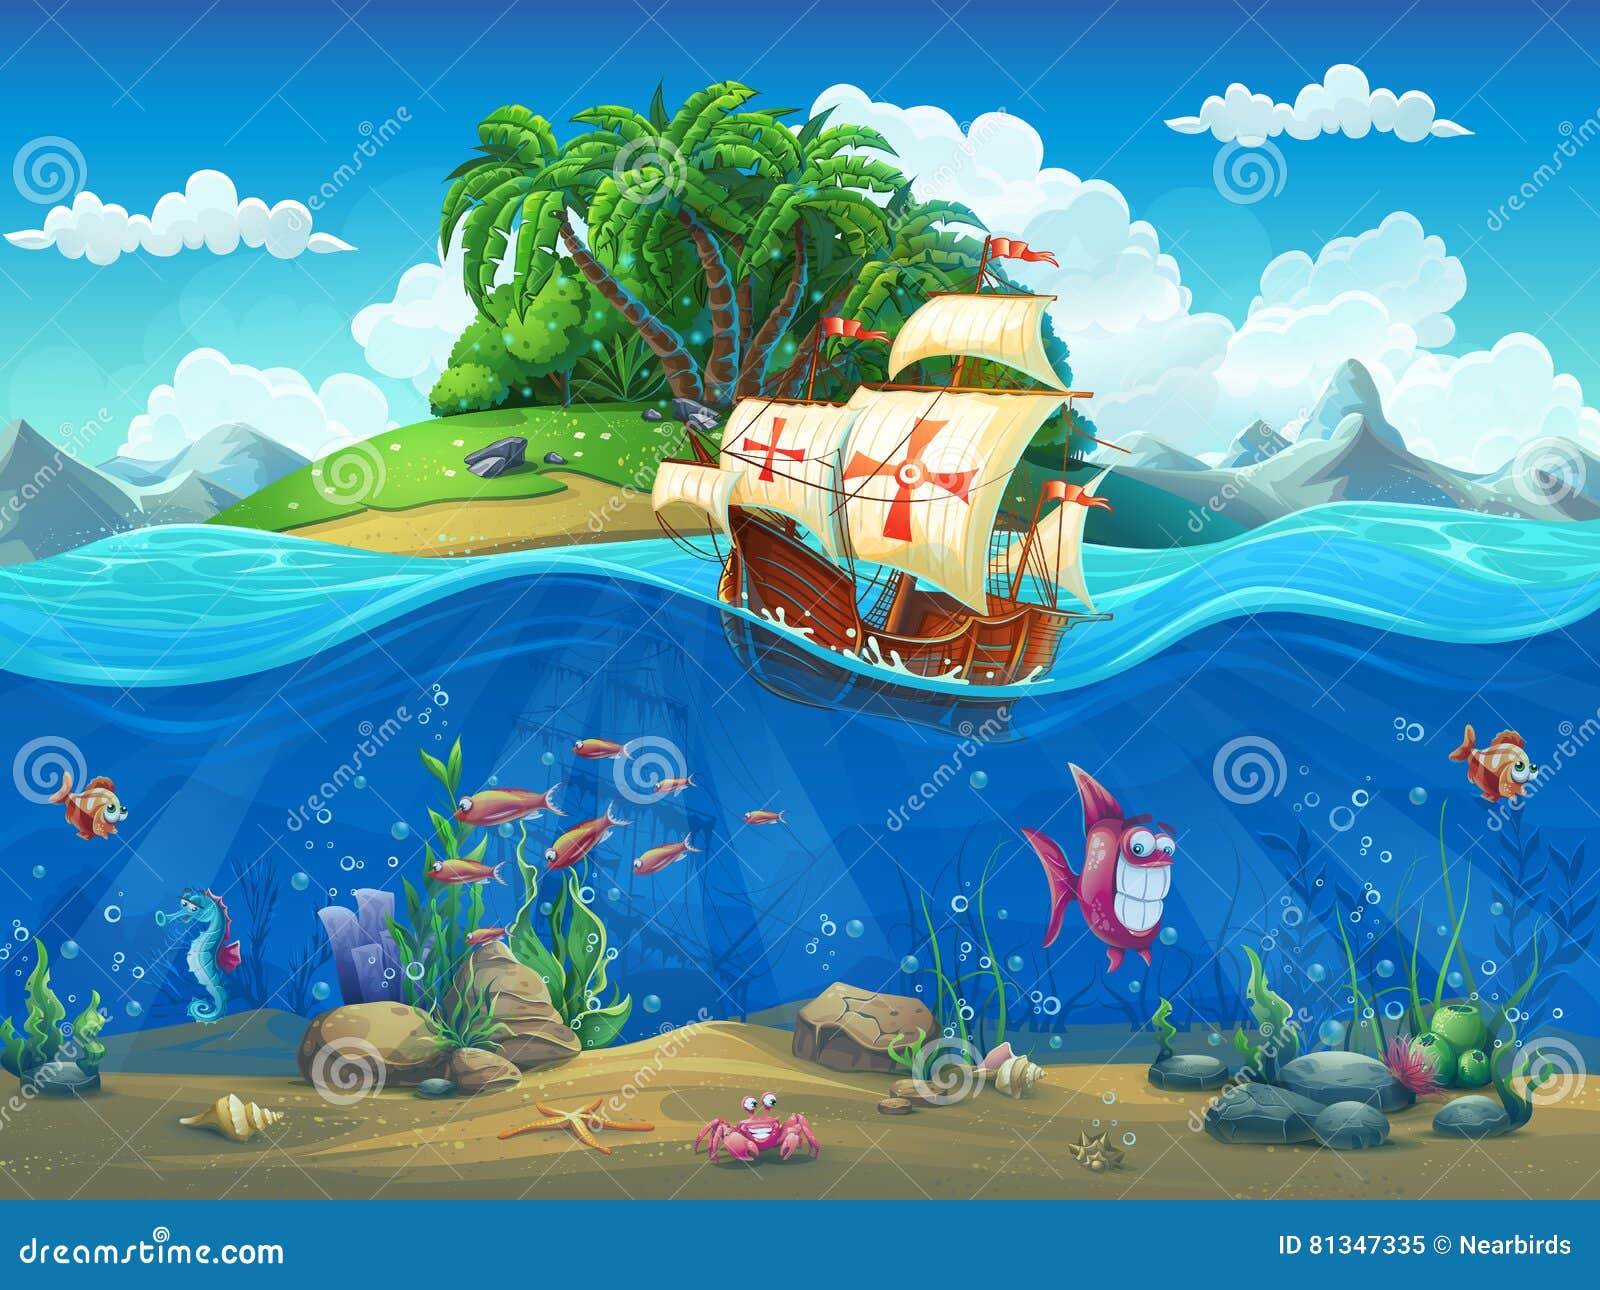 undersea world with island and sailing ship